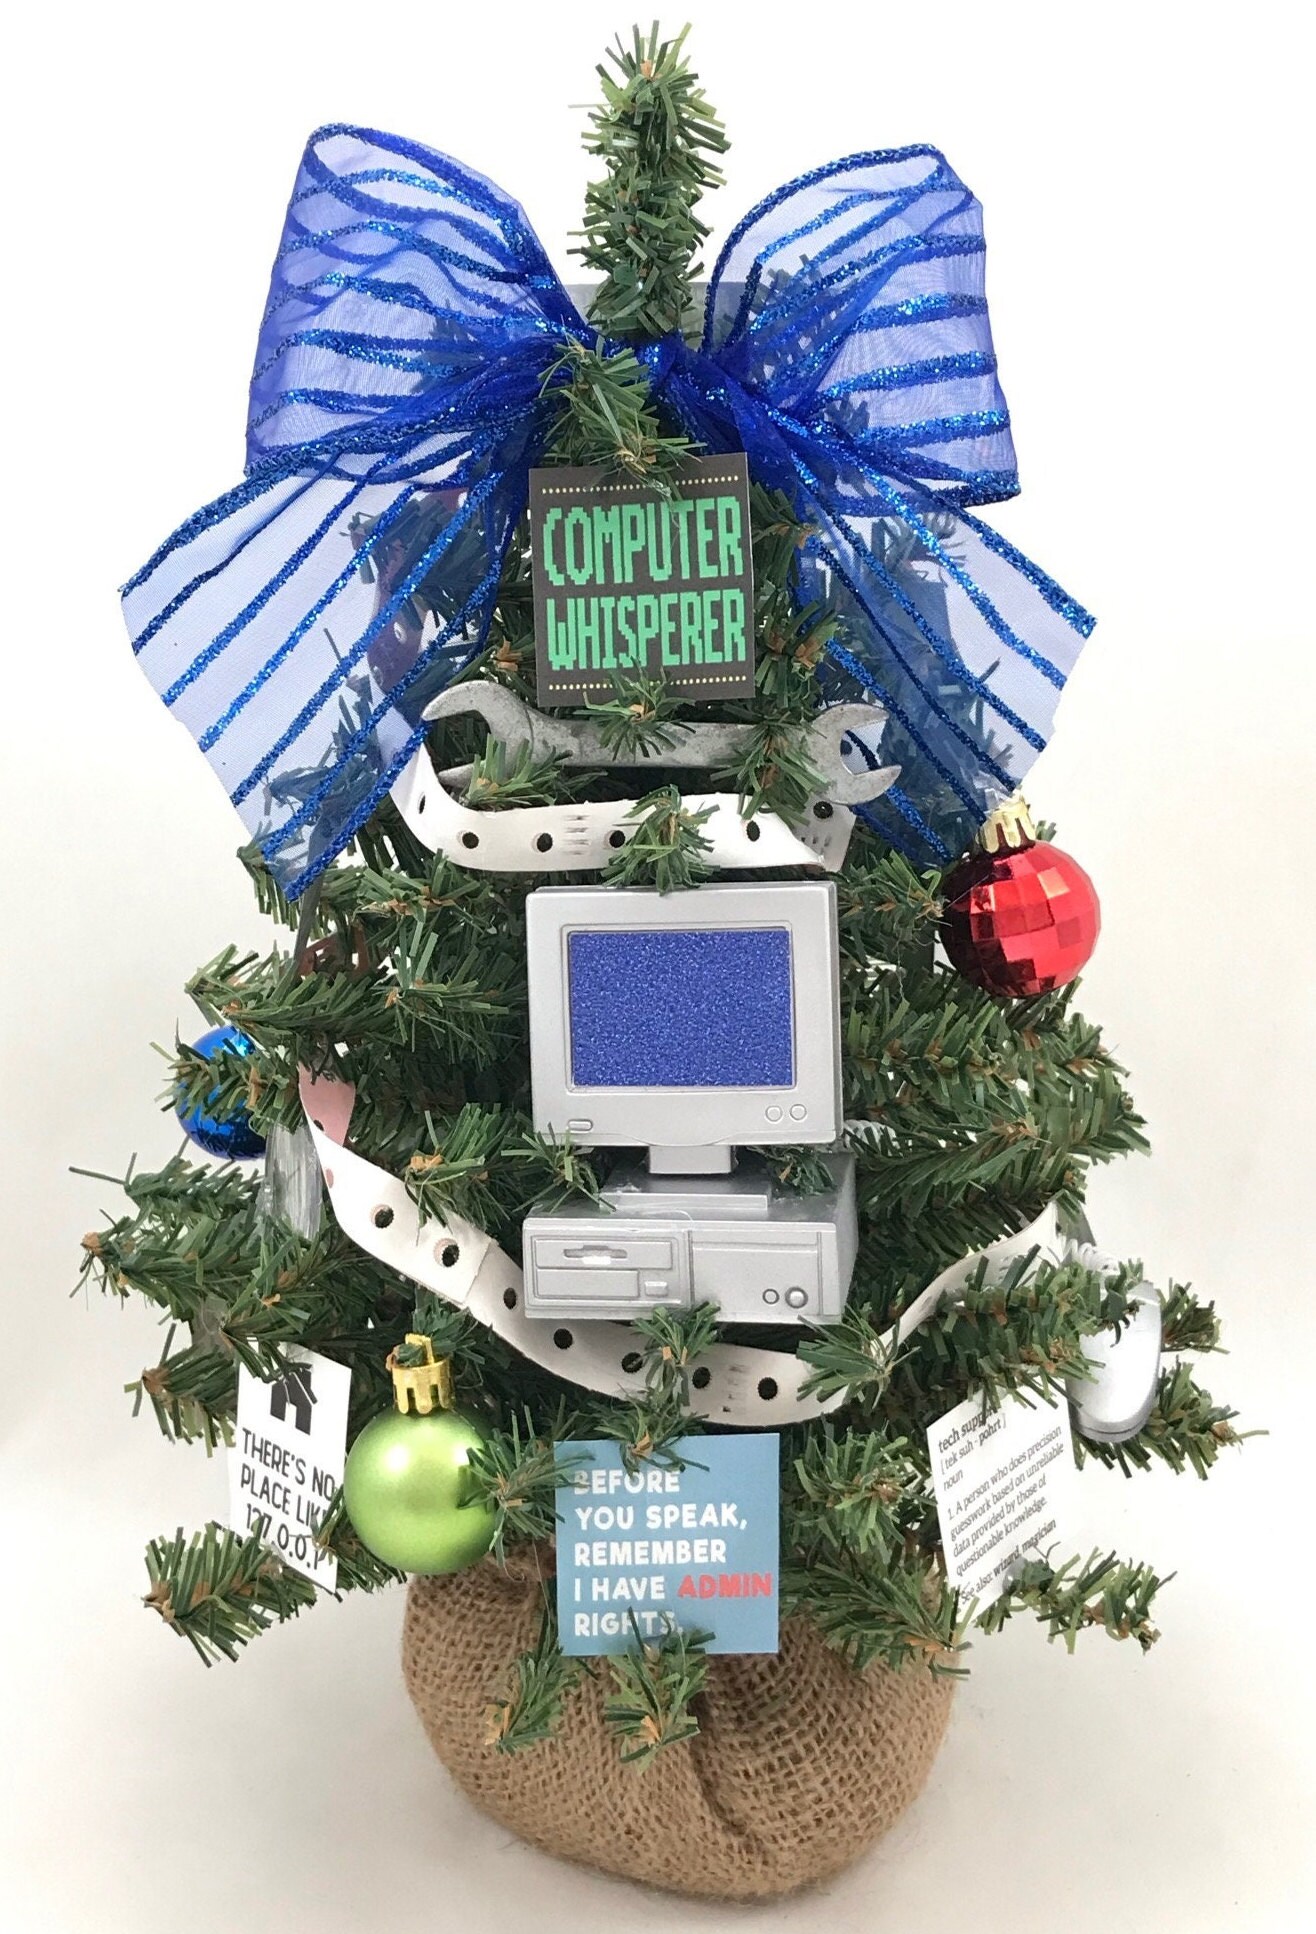 Technology Resources for Christmas